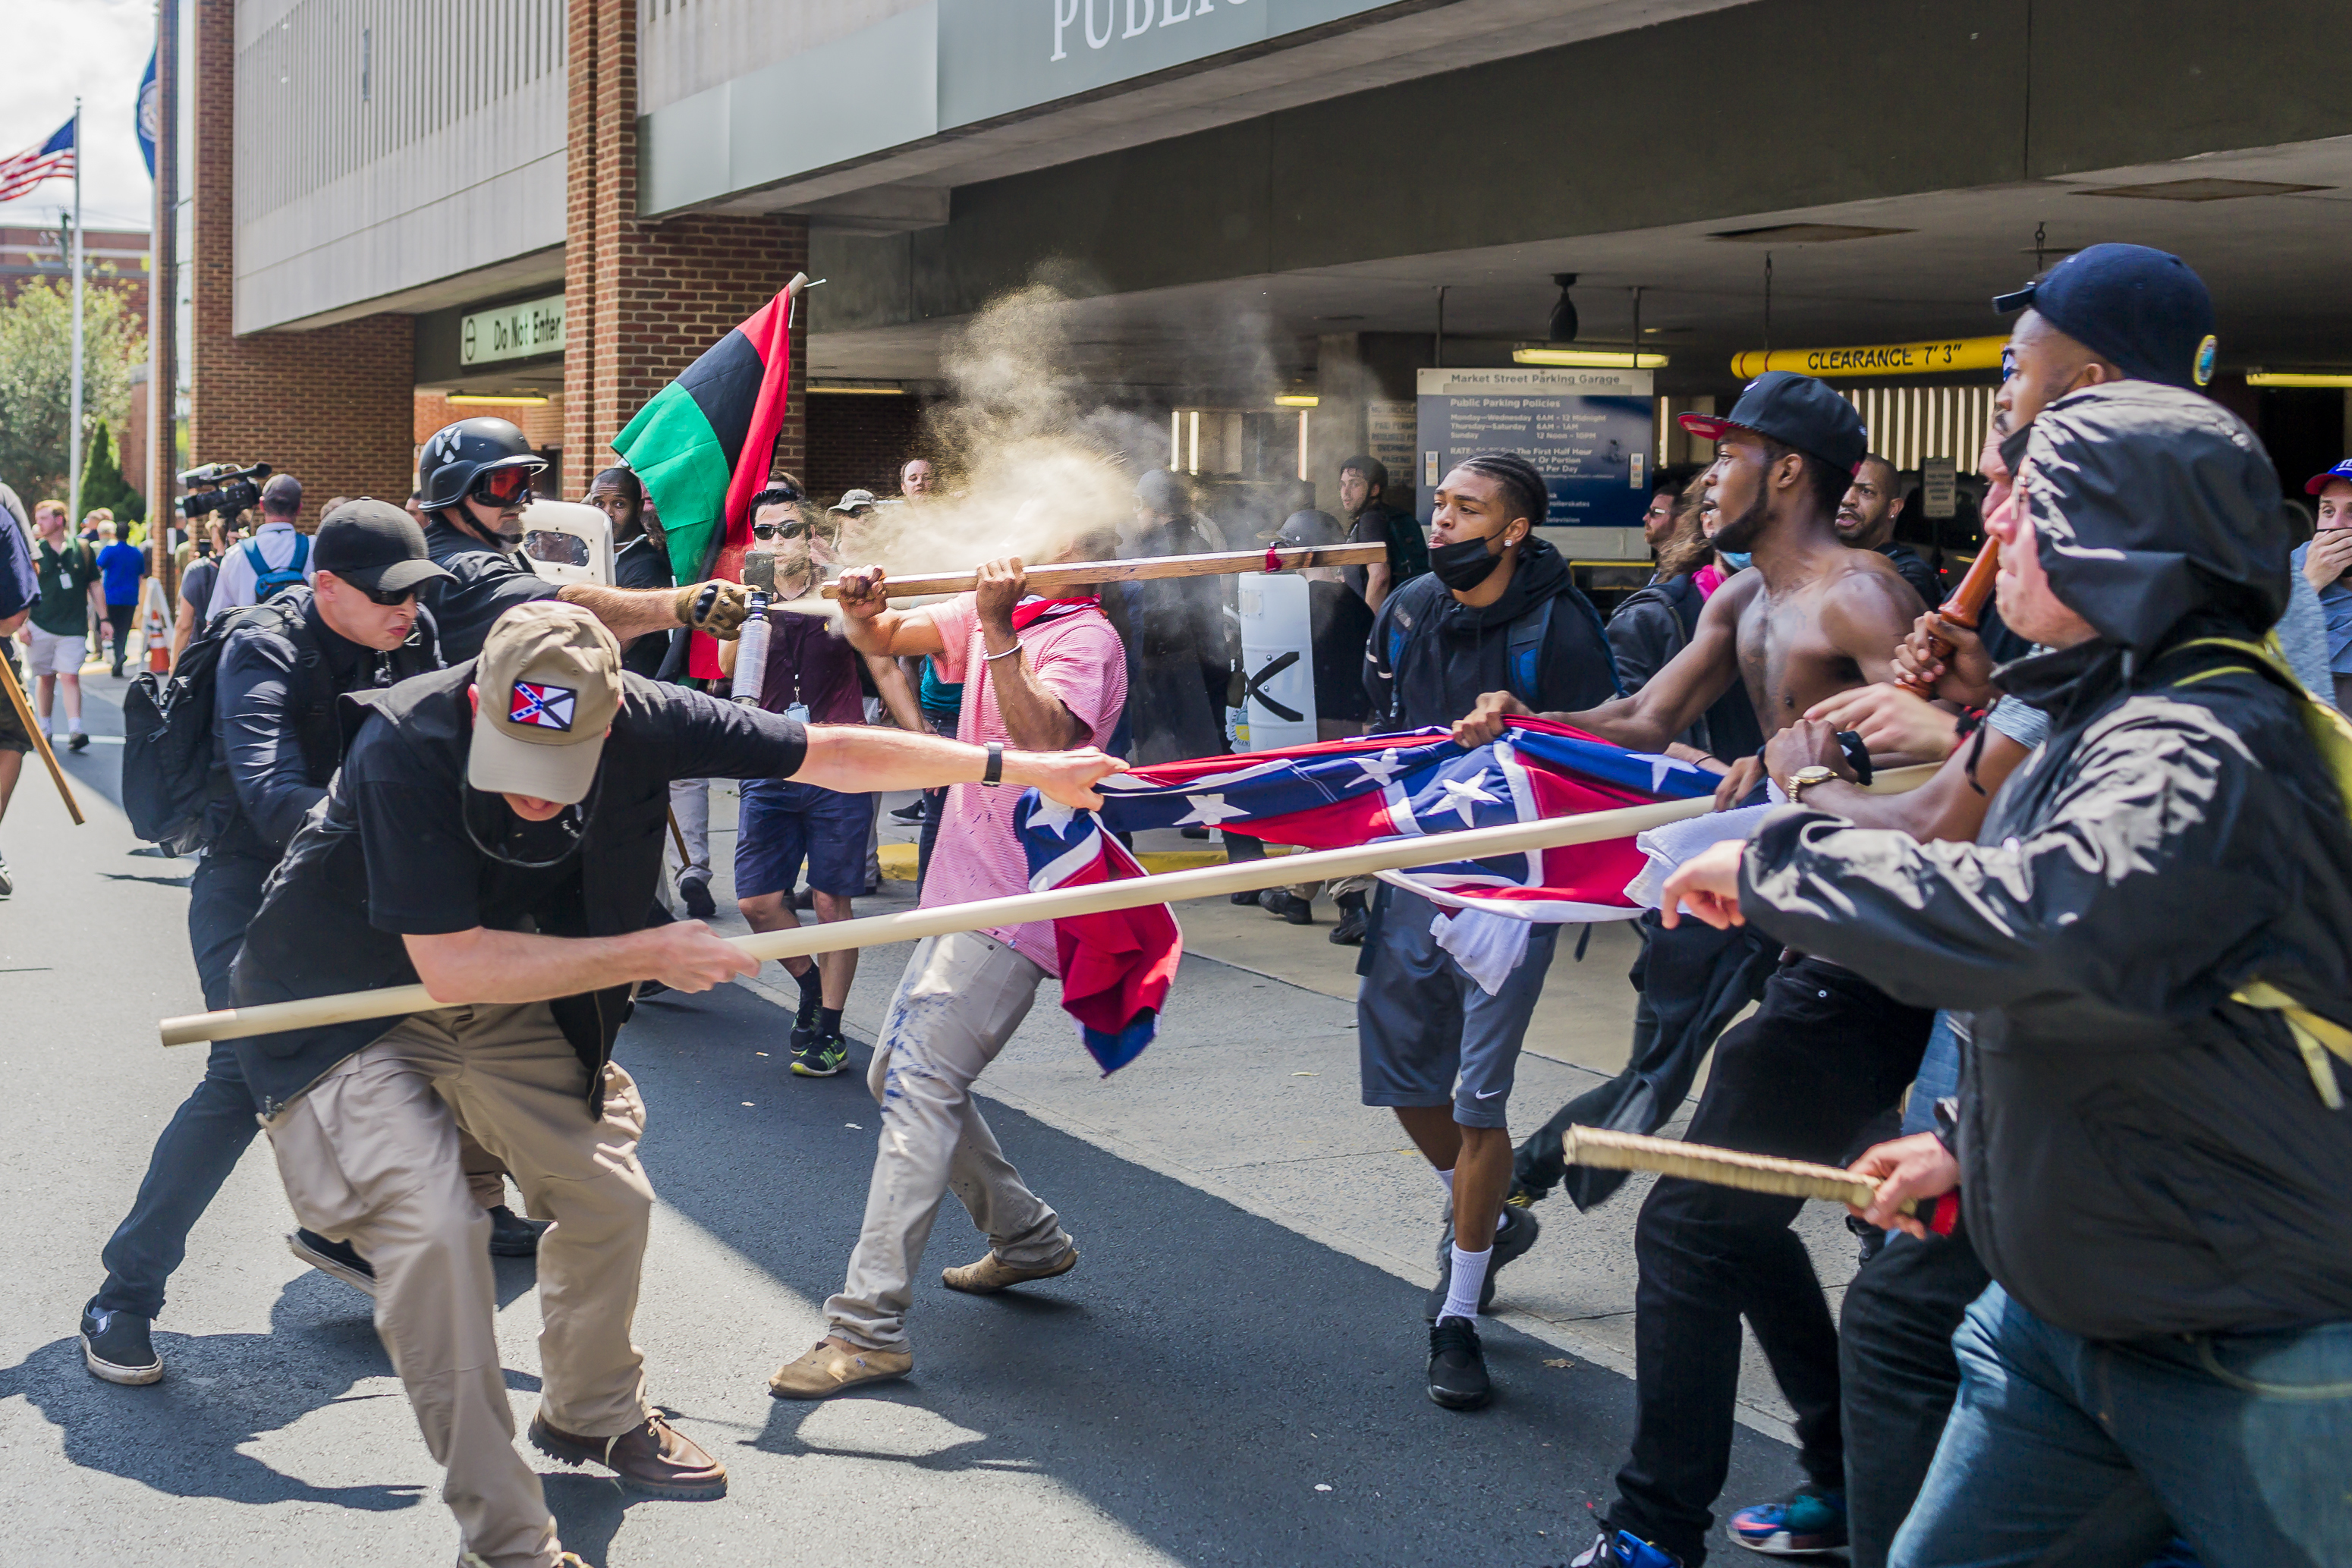 "On Saturday, August 12, 2017, a veritable who's who of white supremacist groups clashed with hundreds of counter-protesters during the 'Unite The Right' rally in Charlottesville, Va." 